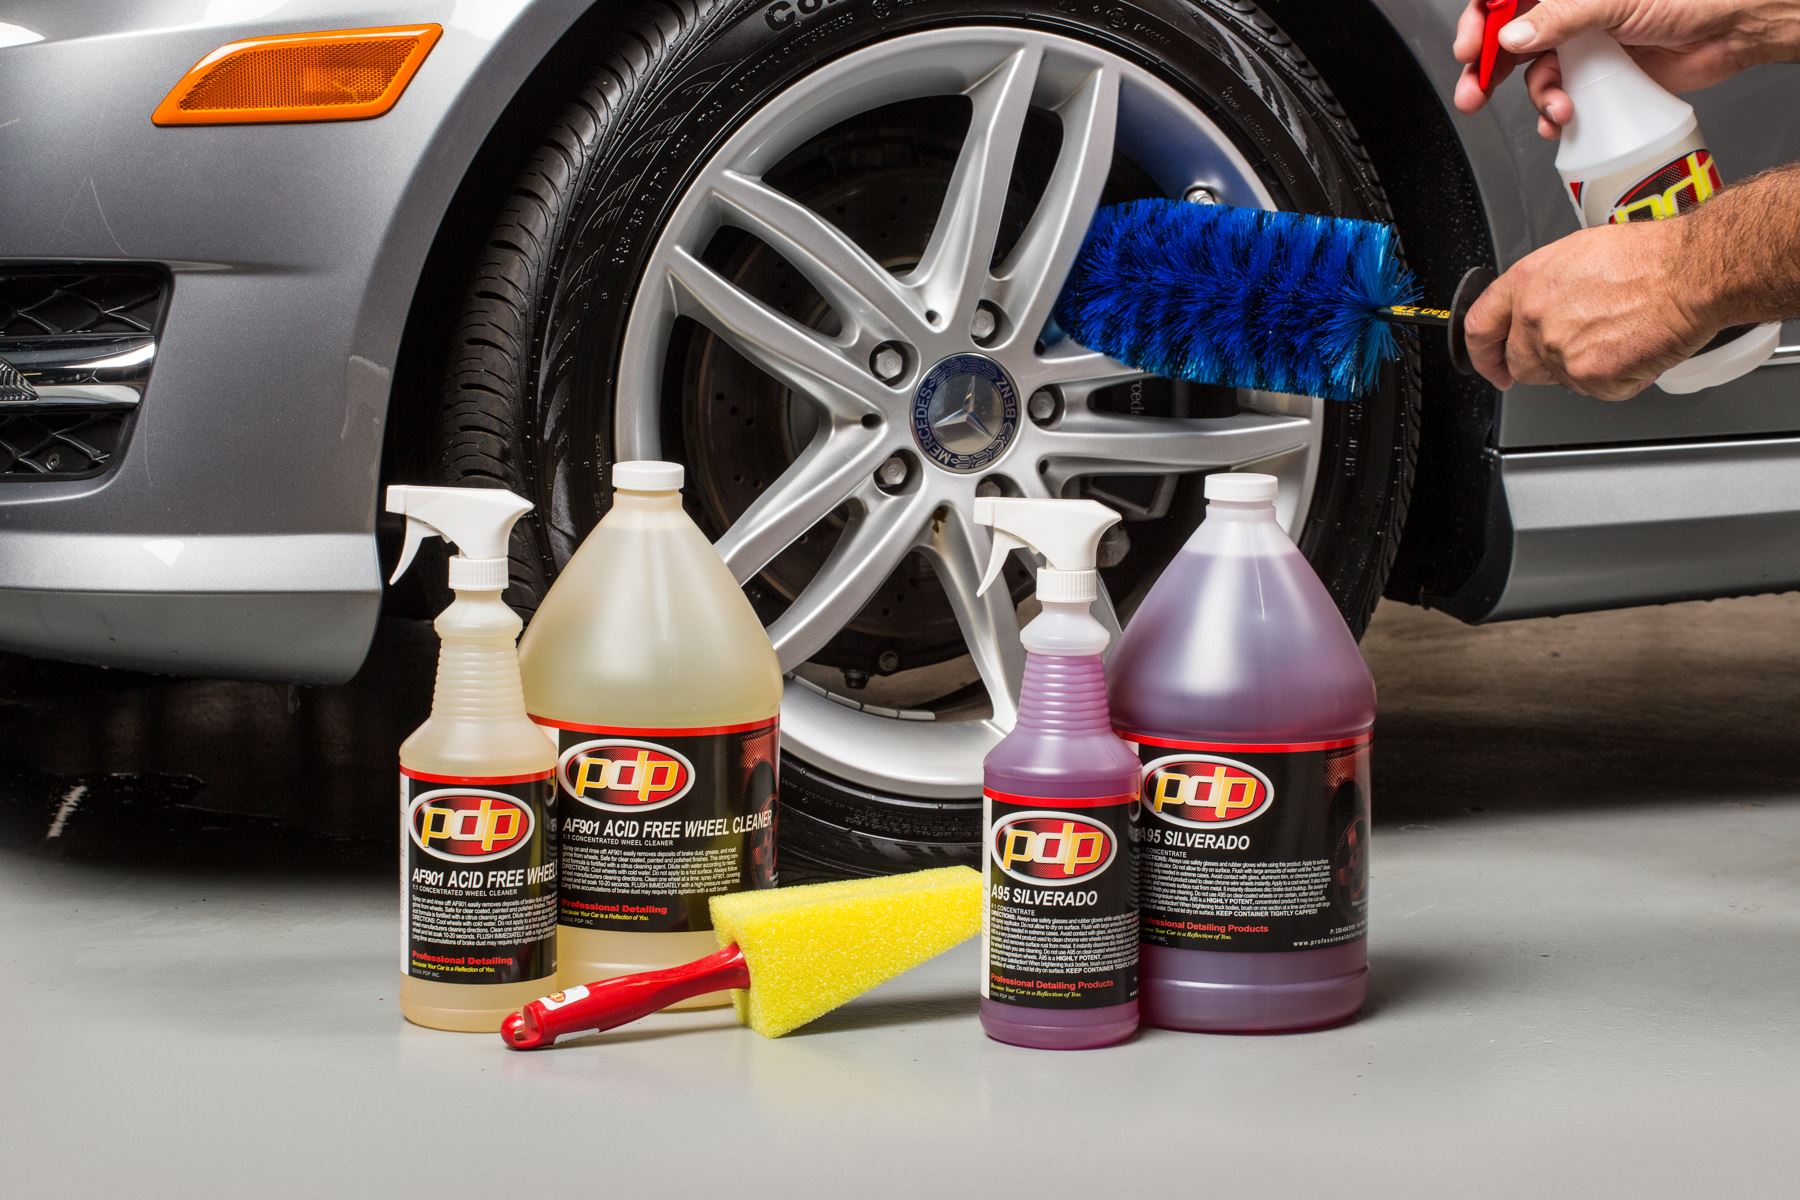 ACID FREE WHEEL CLEANER. Professional Detailing Products, Because